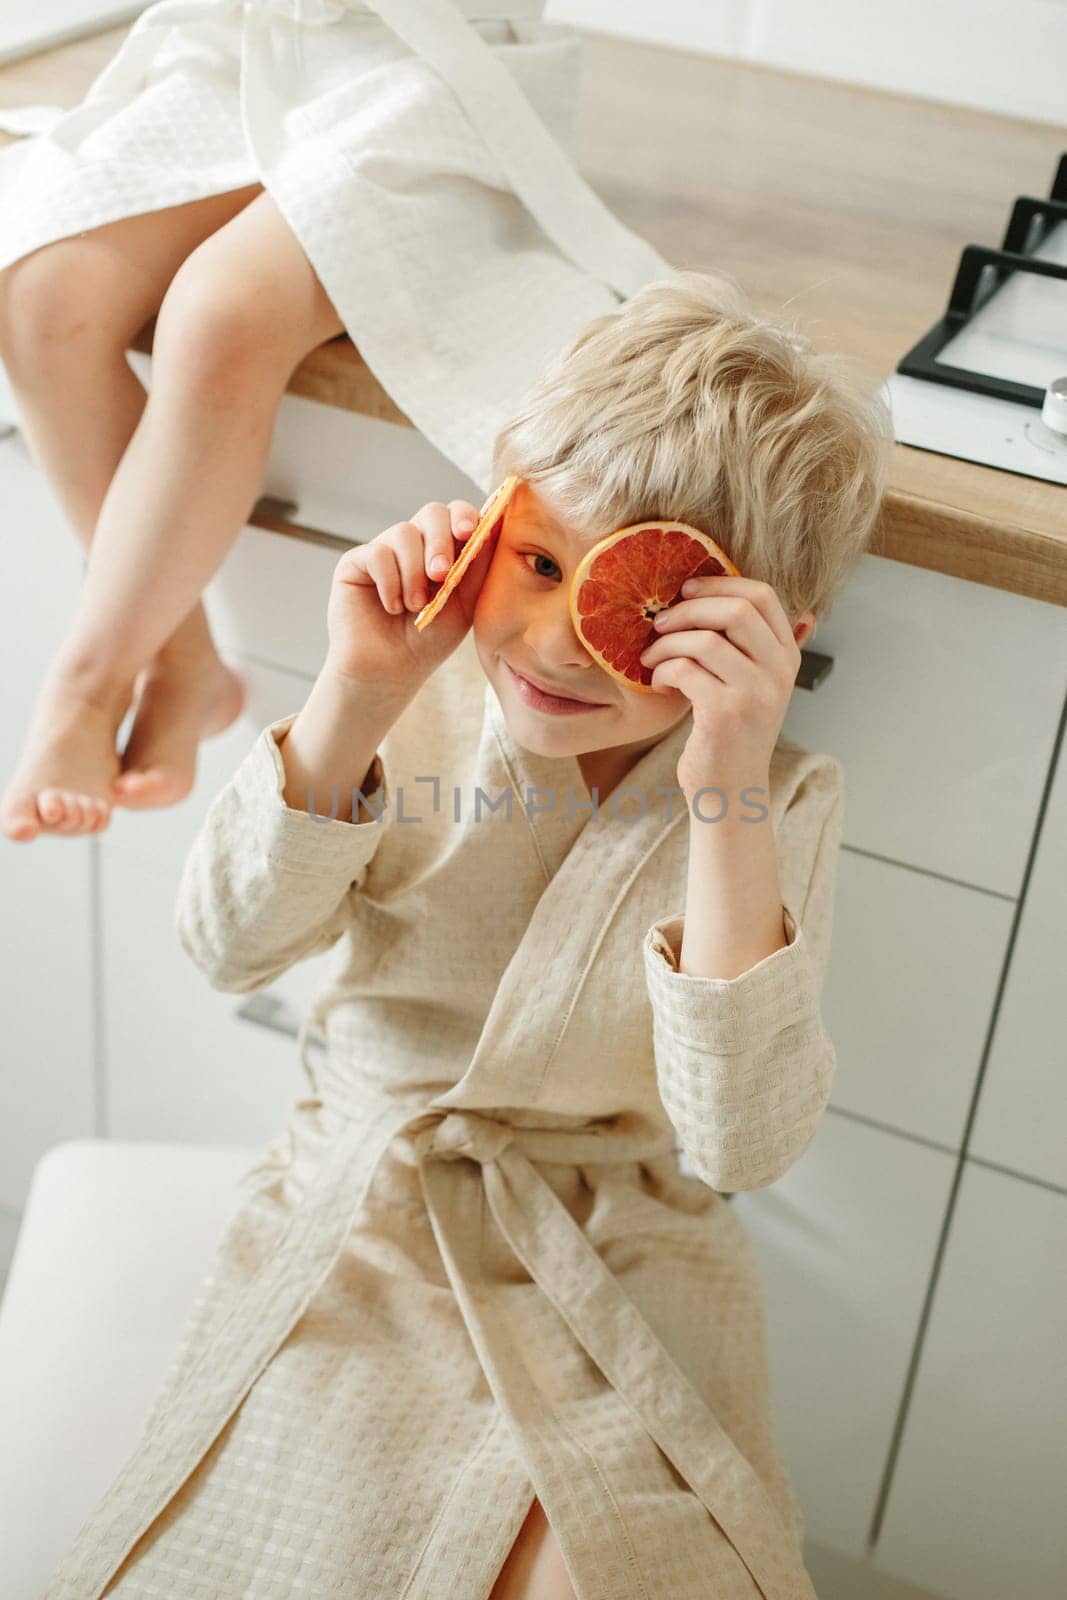 A boy in a bathrobe sits in the kitchen and holds candied oranges in his hands.